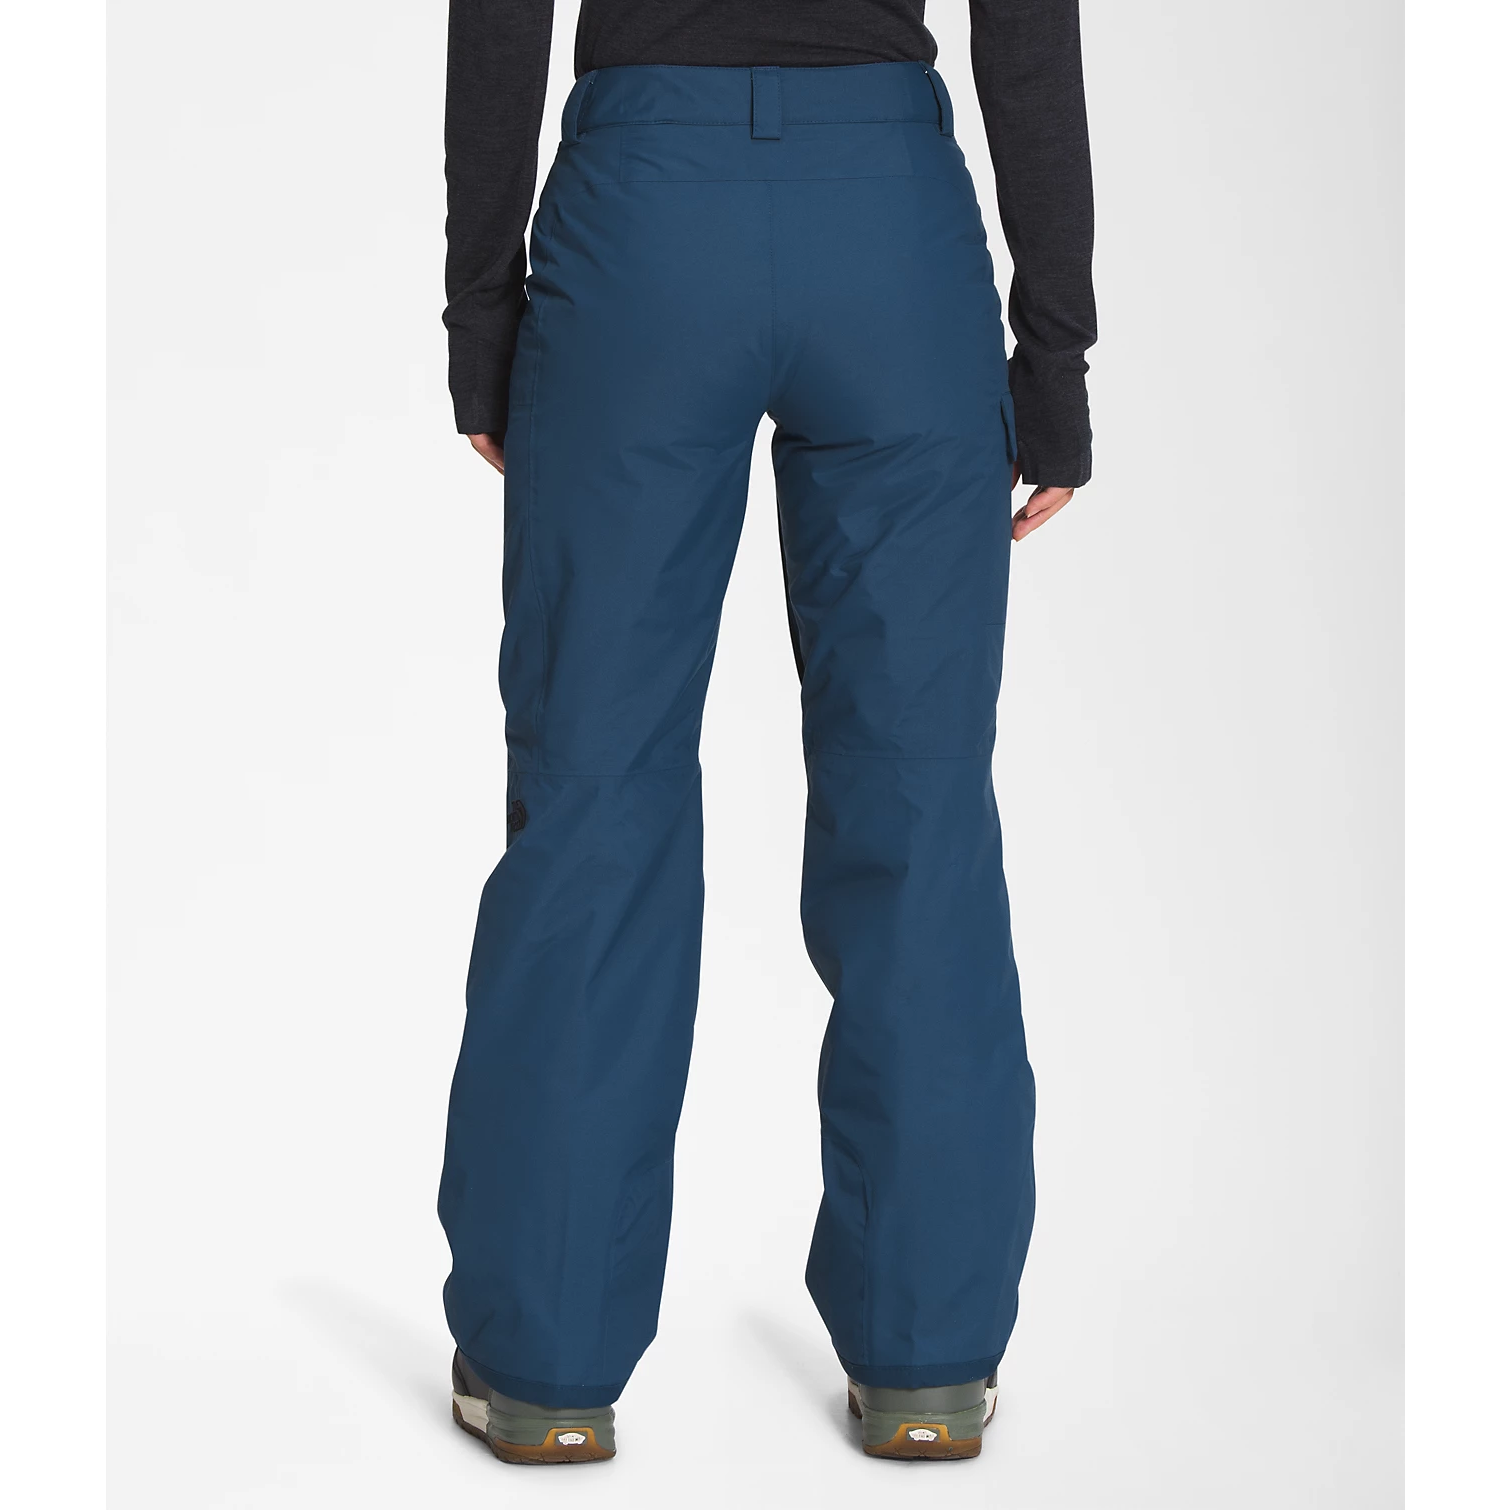 The North Face Freedom Insulated Pant Women's – Trailhead Kingston